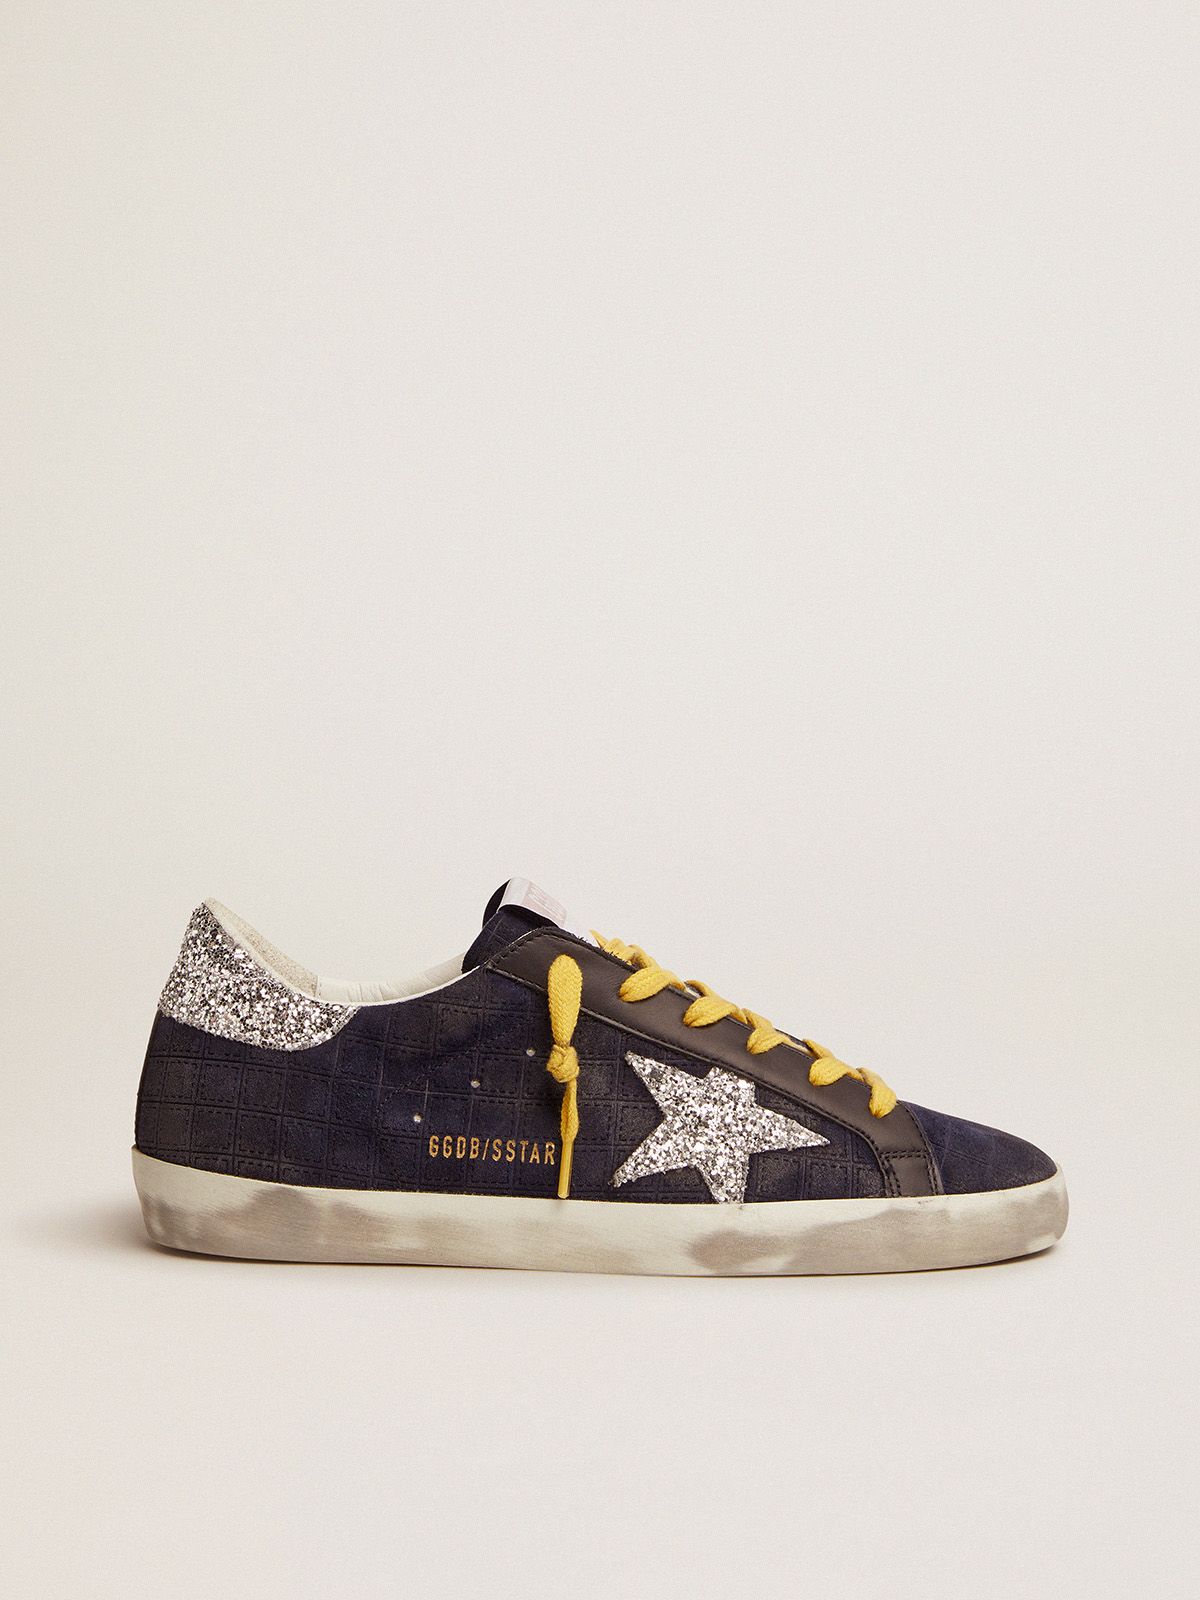 golden goose glitter dark sneakers silver Super-Star checkered with pattern blue suede in details and